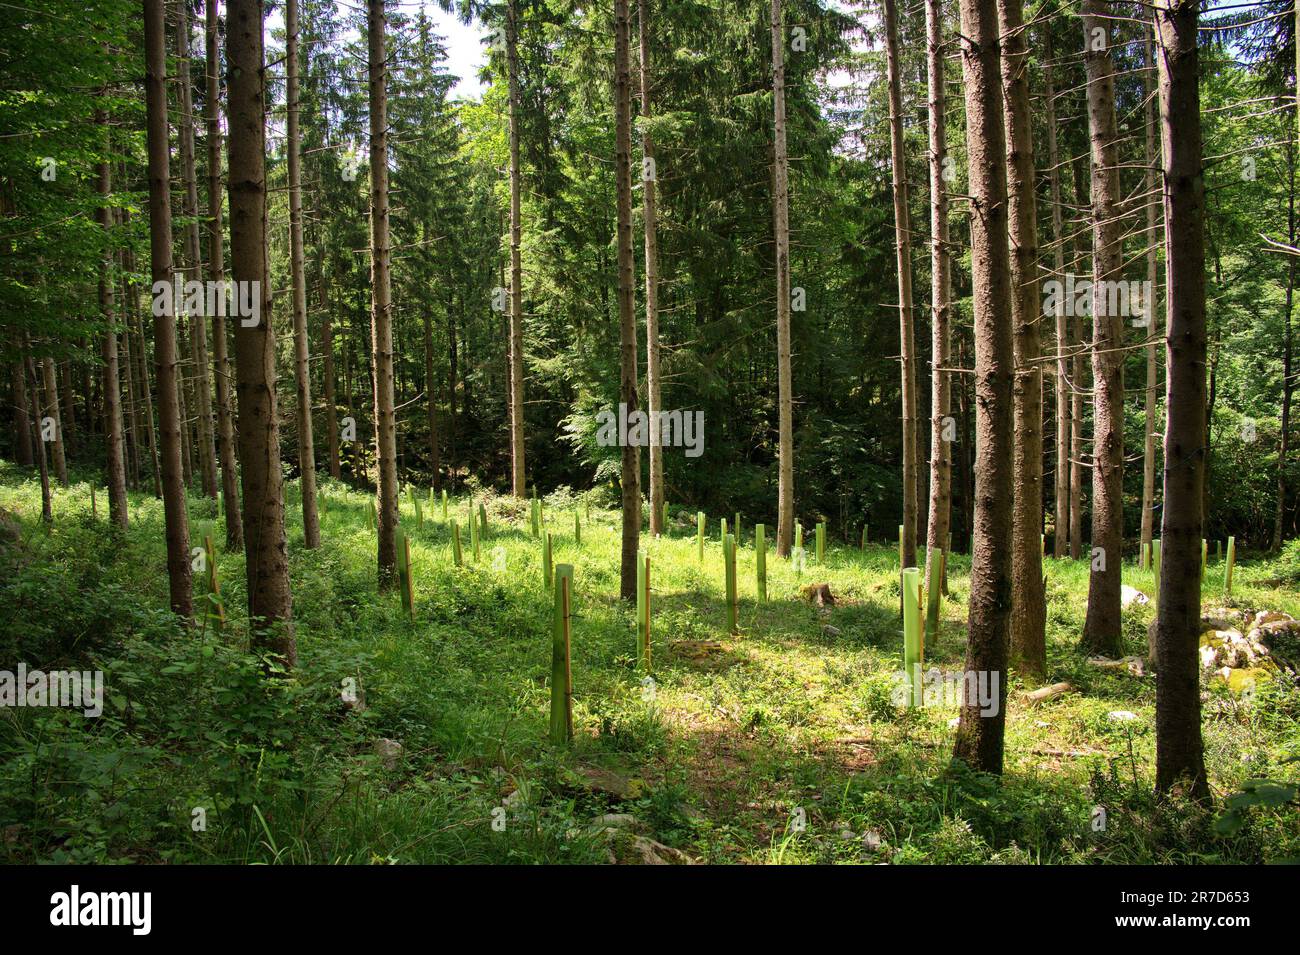 Reforestation by planting young trees Stock Photo